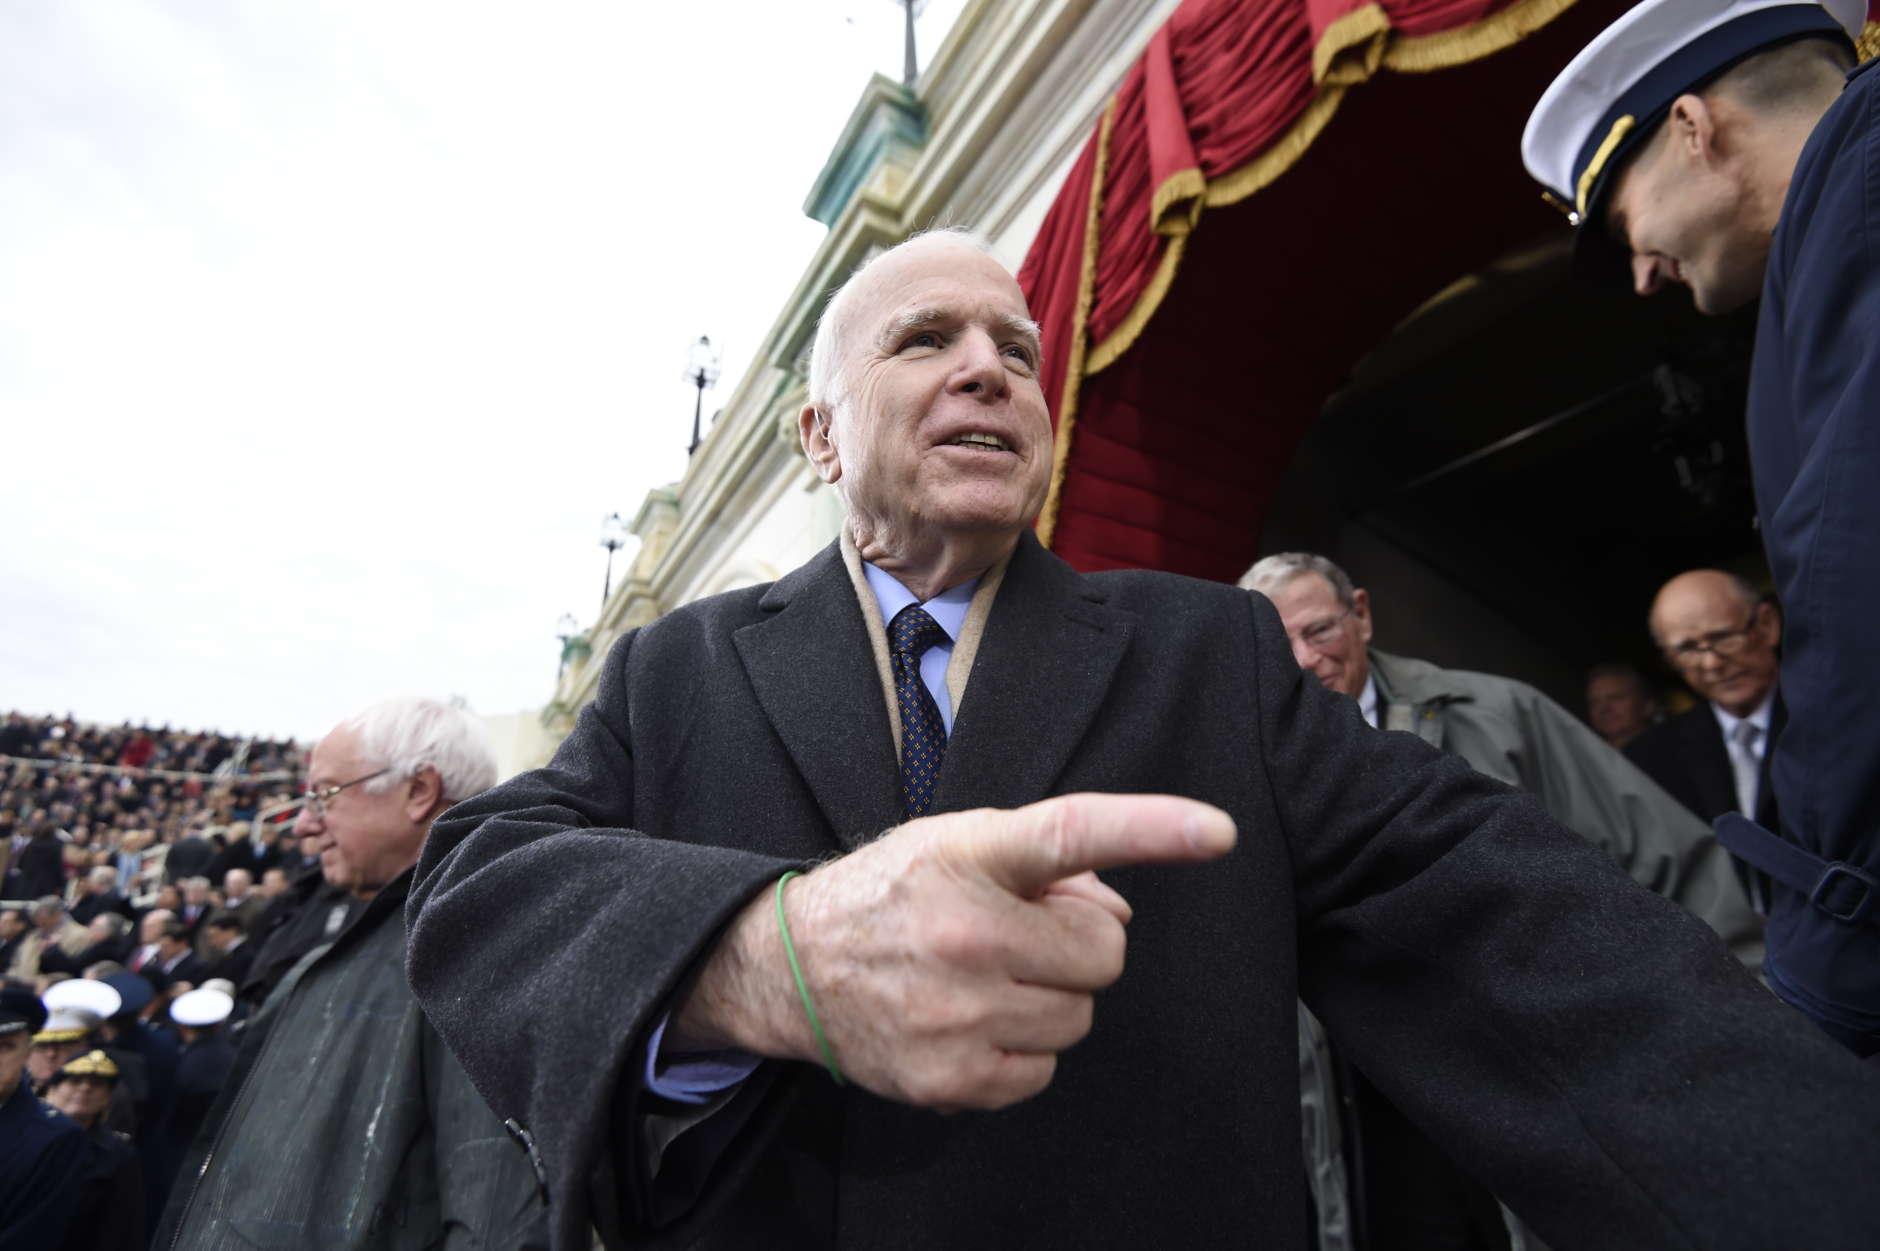 WASHINGTON, DC - JANUARY 20: US Senator John McCain arrives for the Presidential Inauguration of Donald Trump at the US Capitol on January 20, 2017 in Washington, DC. Donald J. Trump will become the 45th president of the United States today.  (Photo by Saul Loeb - Pool/Getty Images)